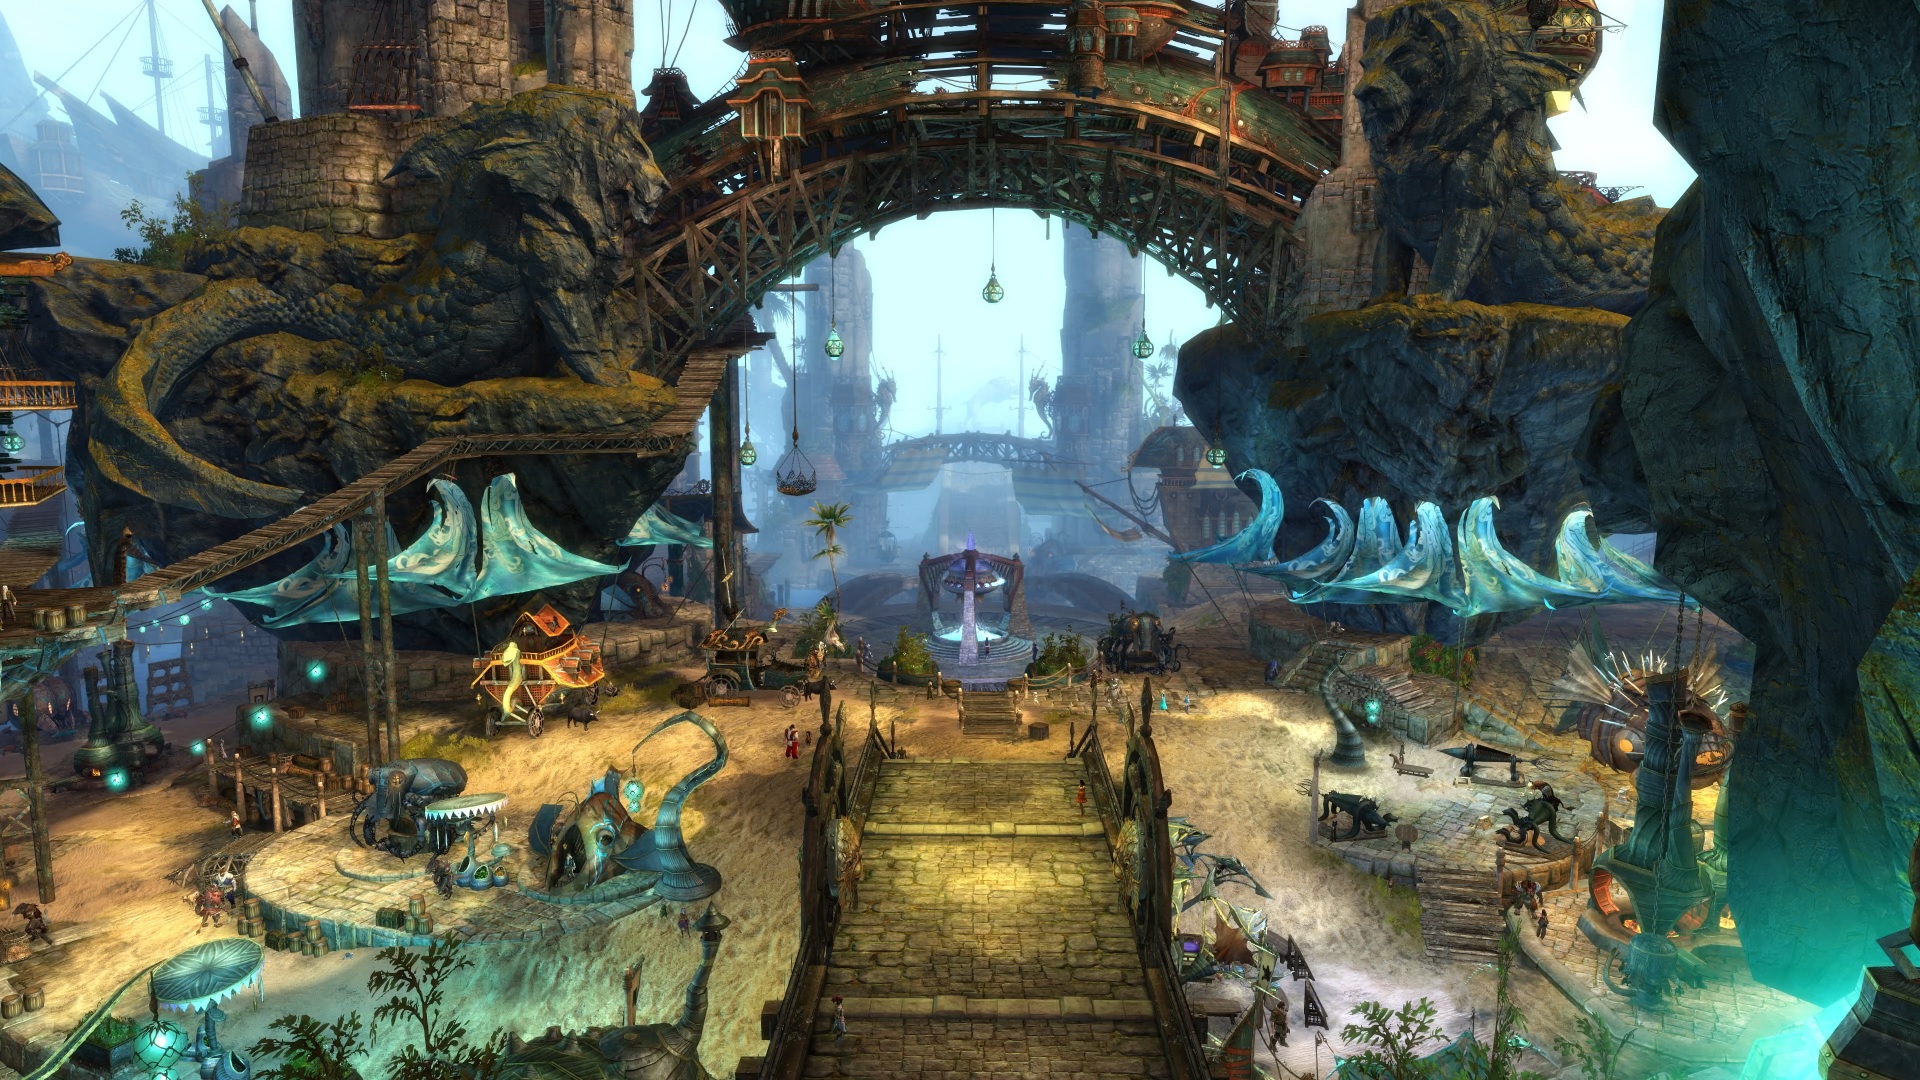 Guild Wars 2 - An overhead view of the original Lion'S Arch, a city of docks and markets with a pirate-y flair.